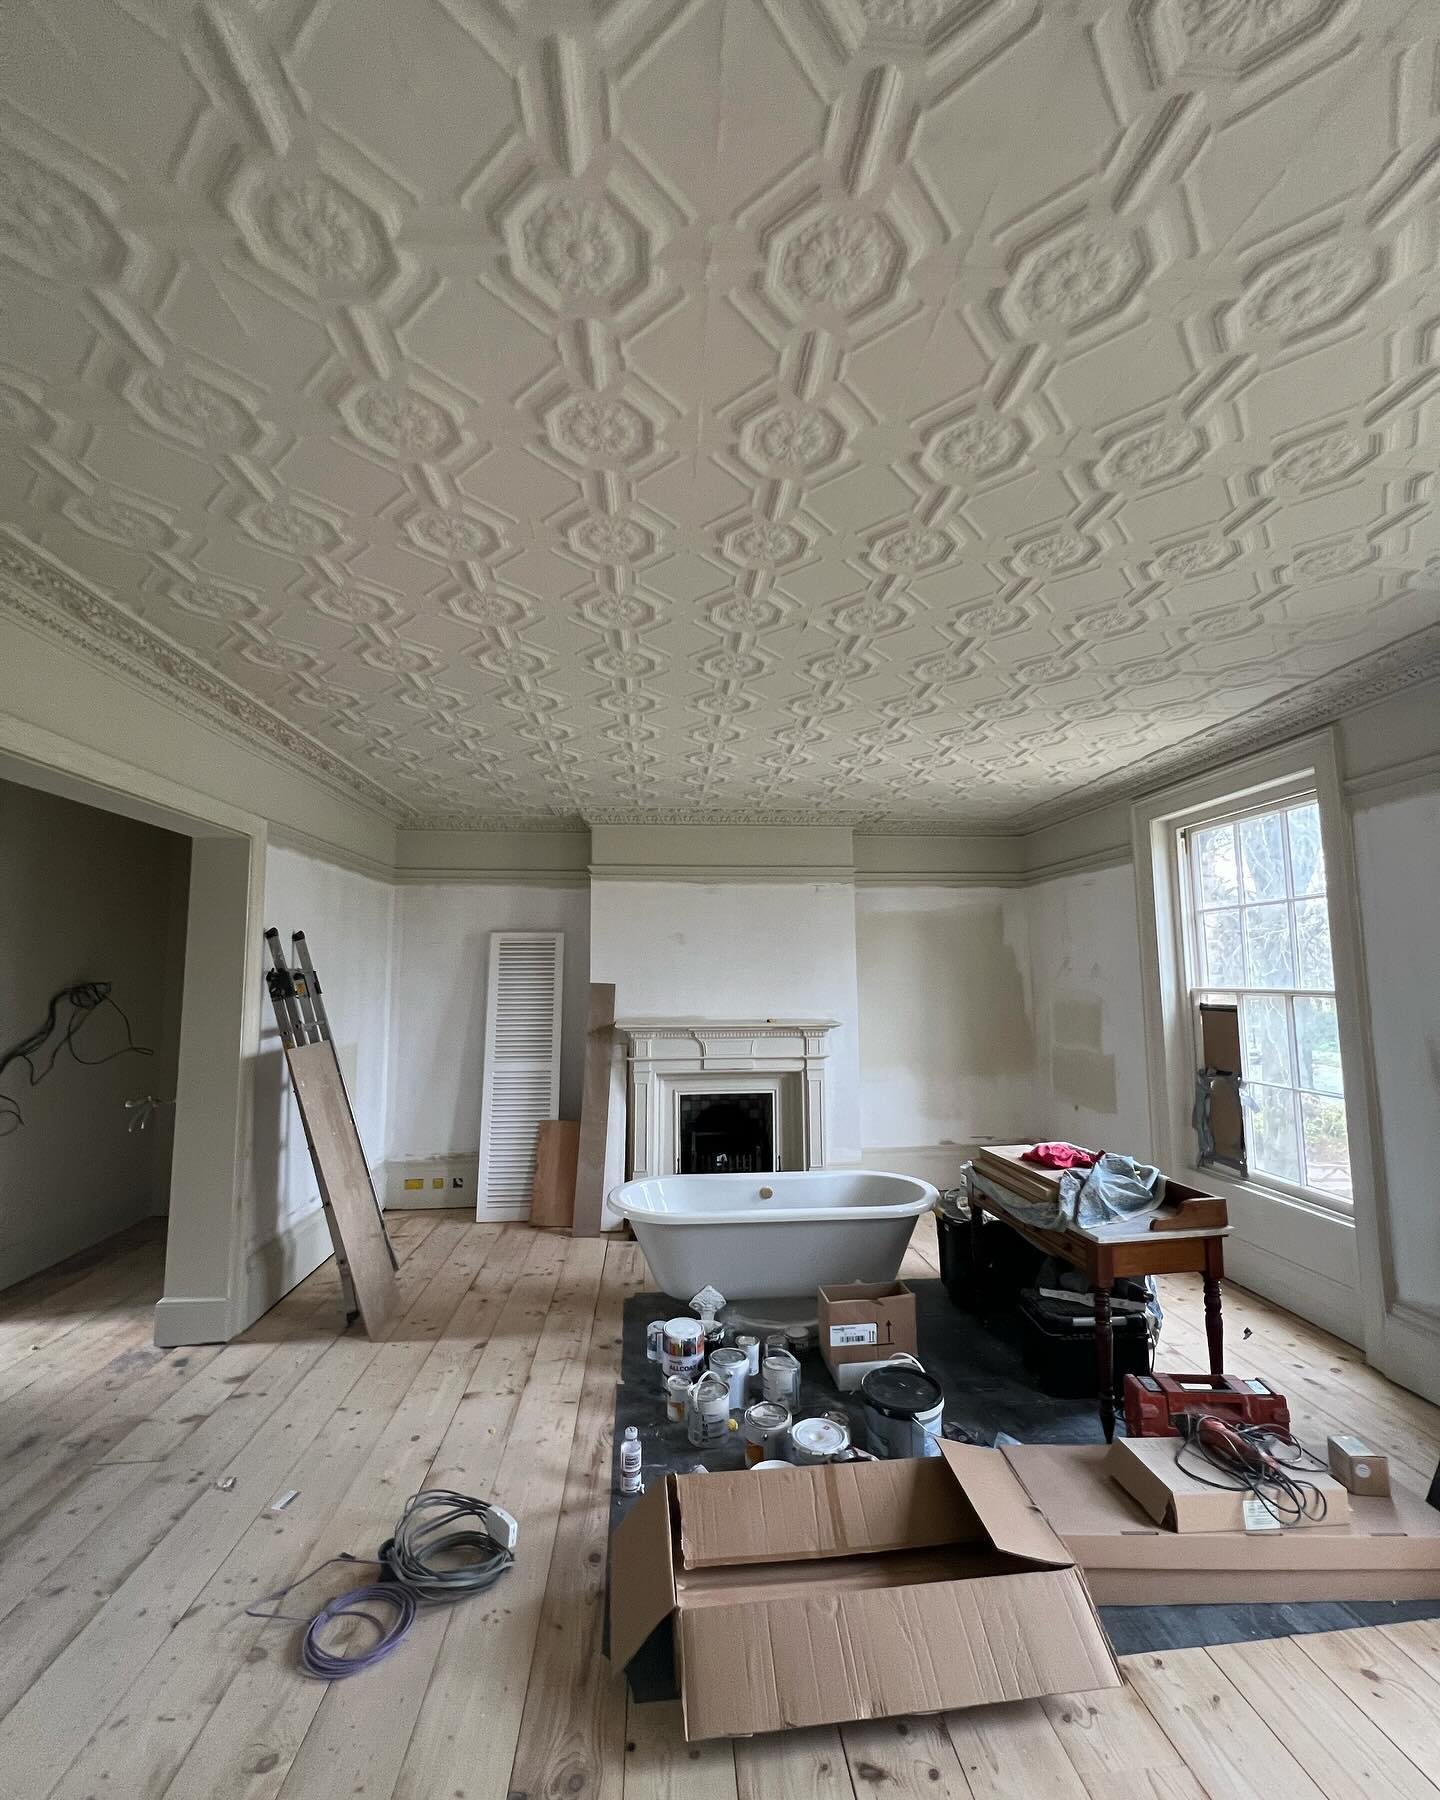 It&rsquo;s been a while since I&rsquo;ve posted as we&rsquo;ve been super busy&hellip;. This is the master bedroom ( one of many rooms) on belvoir terrace project with its dressing room and ensuite coming along nicely the walls in the master bedroom 